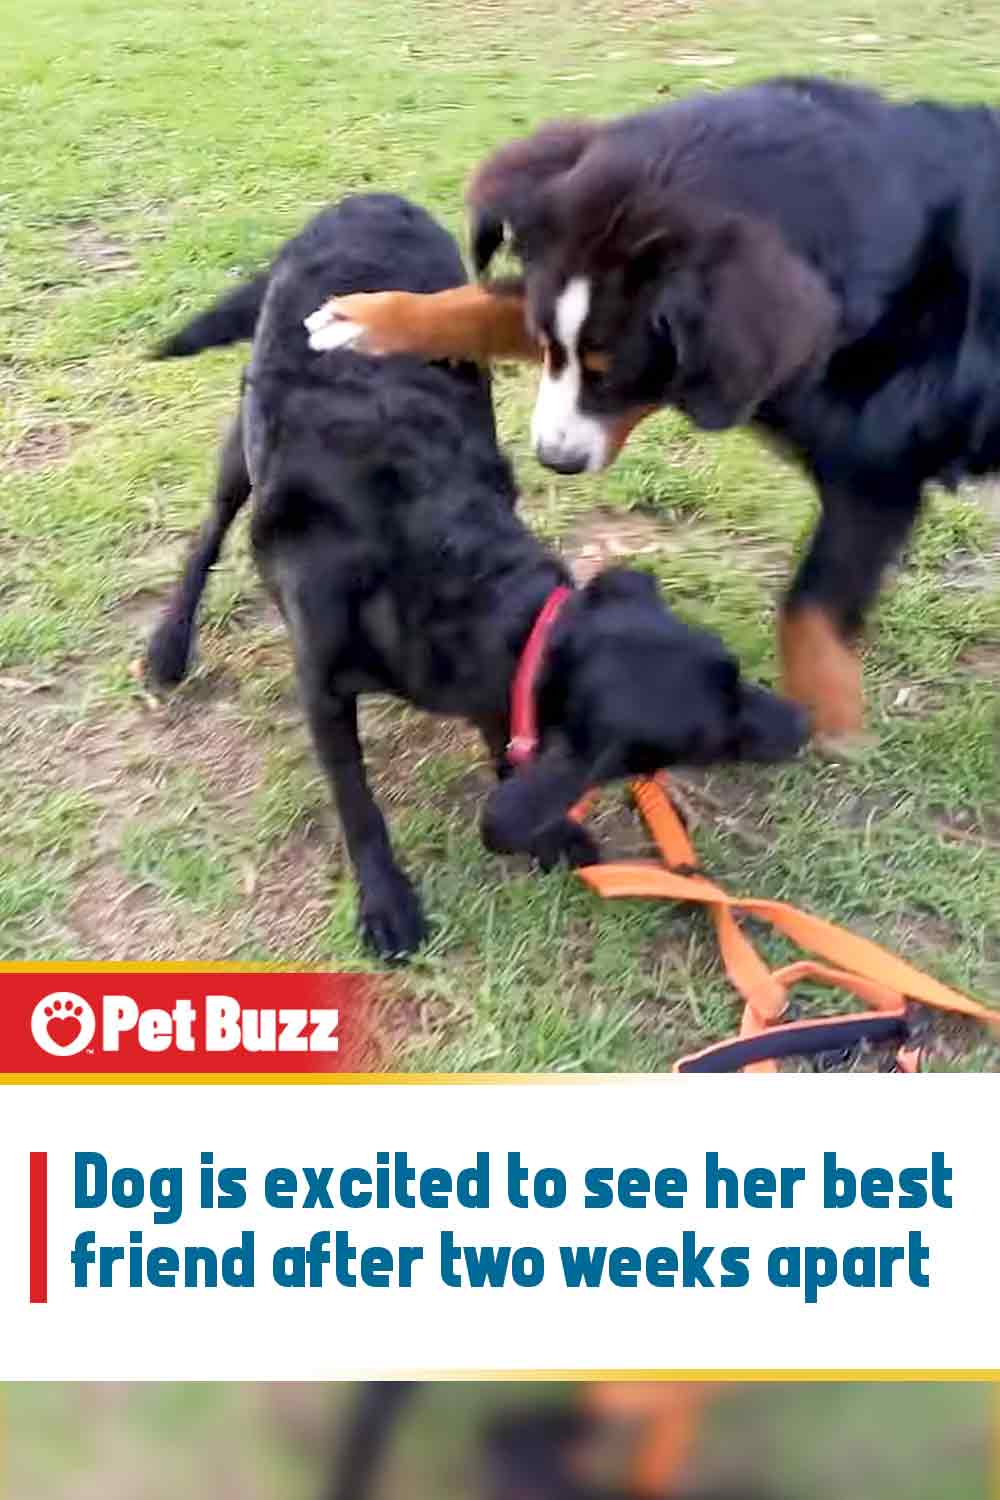 Dog is excited to see her best friend after two weeks apart